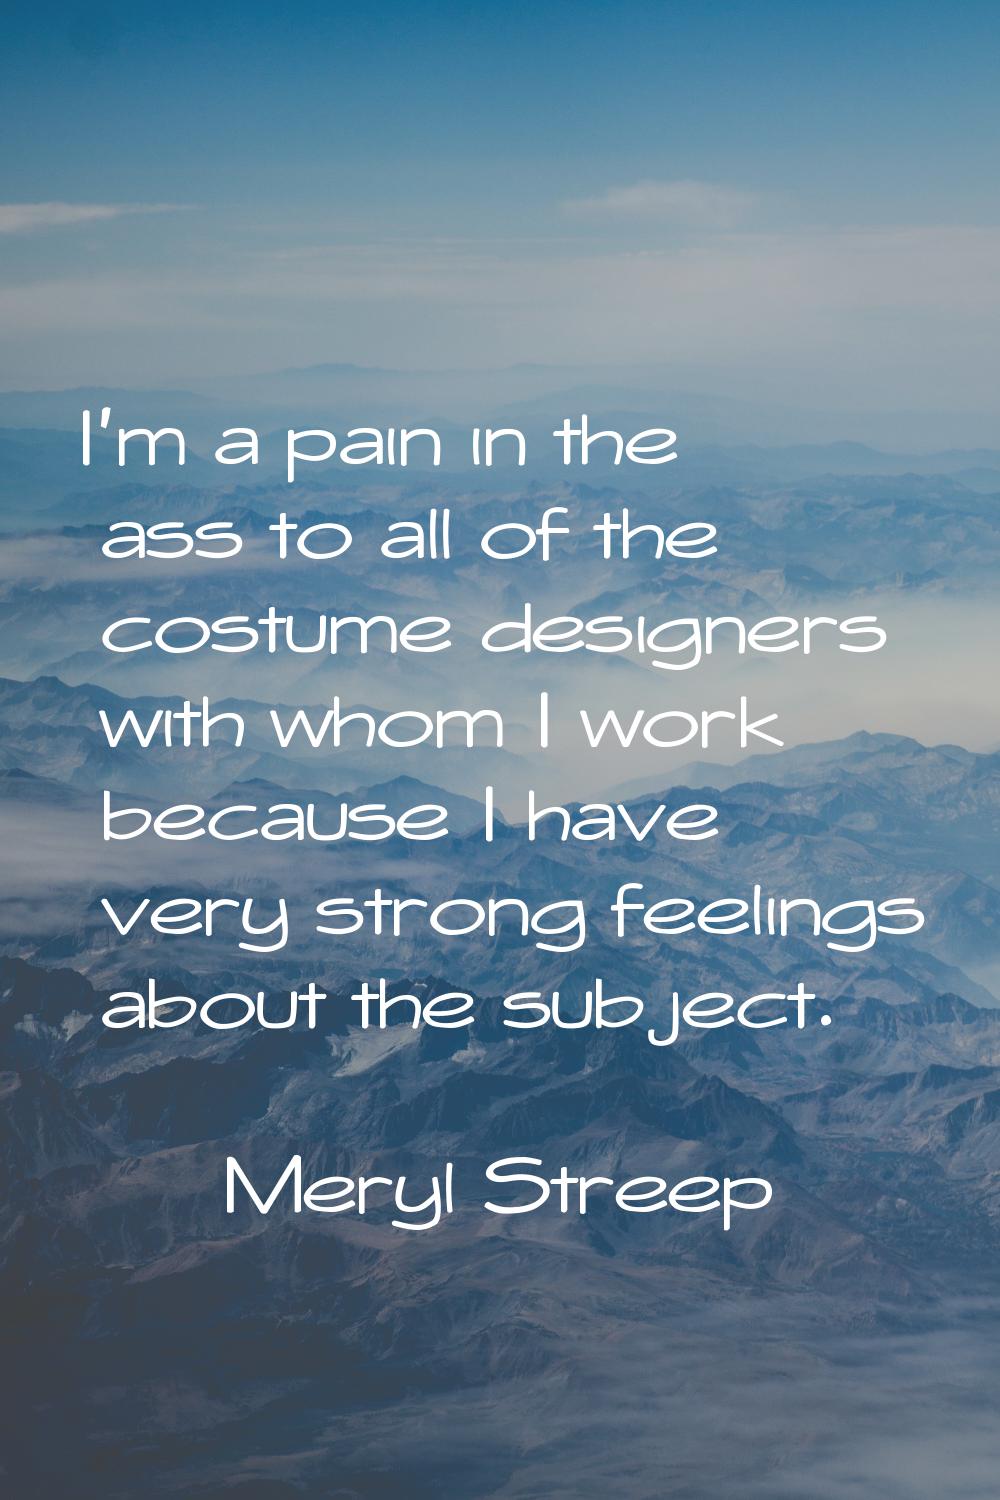 I'm a pain in the ass to all of the costume designers with whom I work because I have very strong f